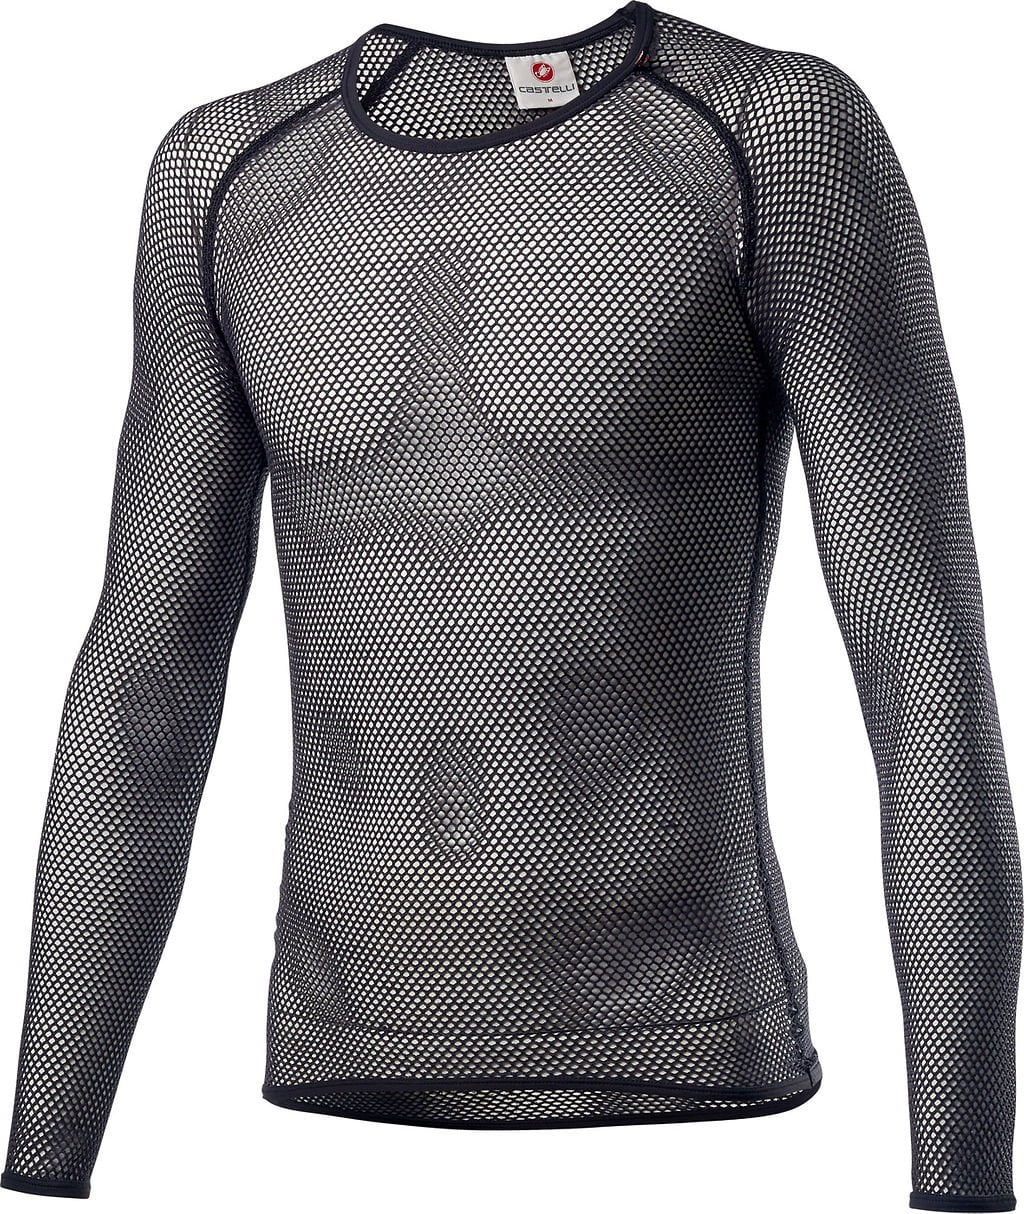 Miracolo Wool Long Sleeve Cycling Base Layer Base Layer, for men, size M